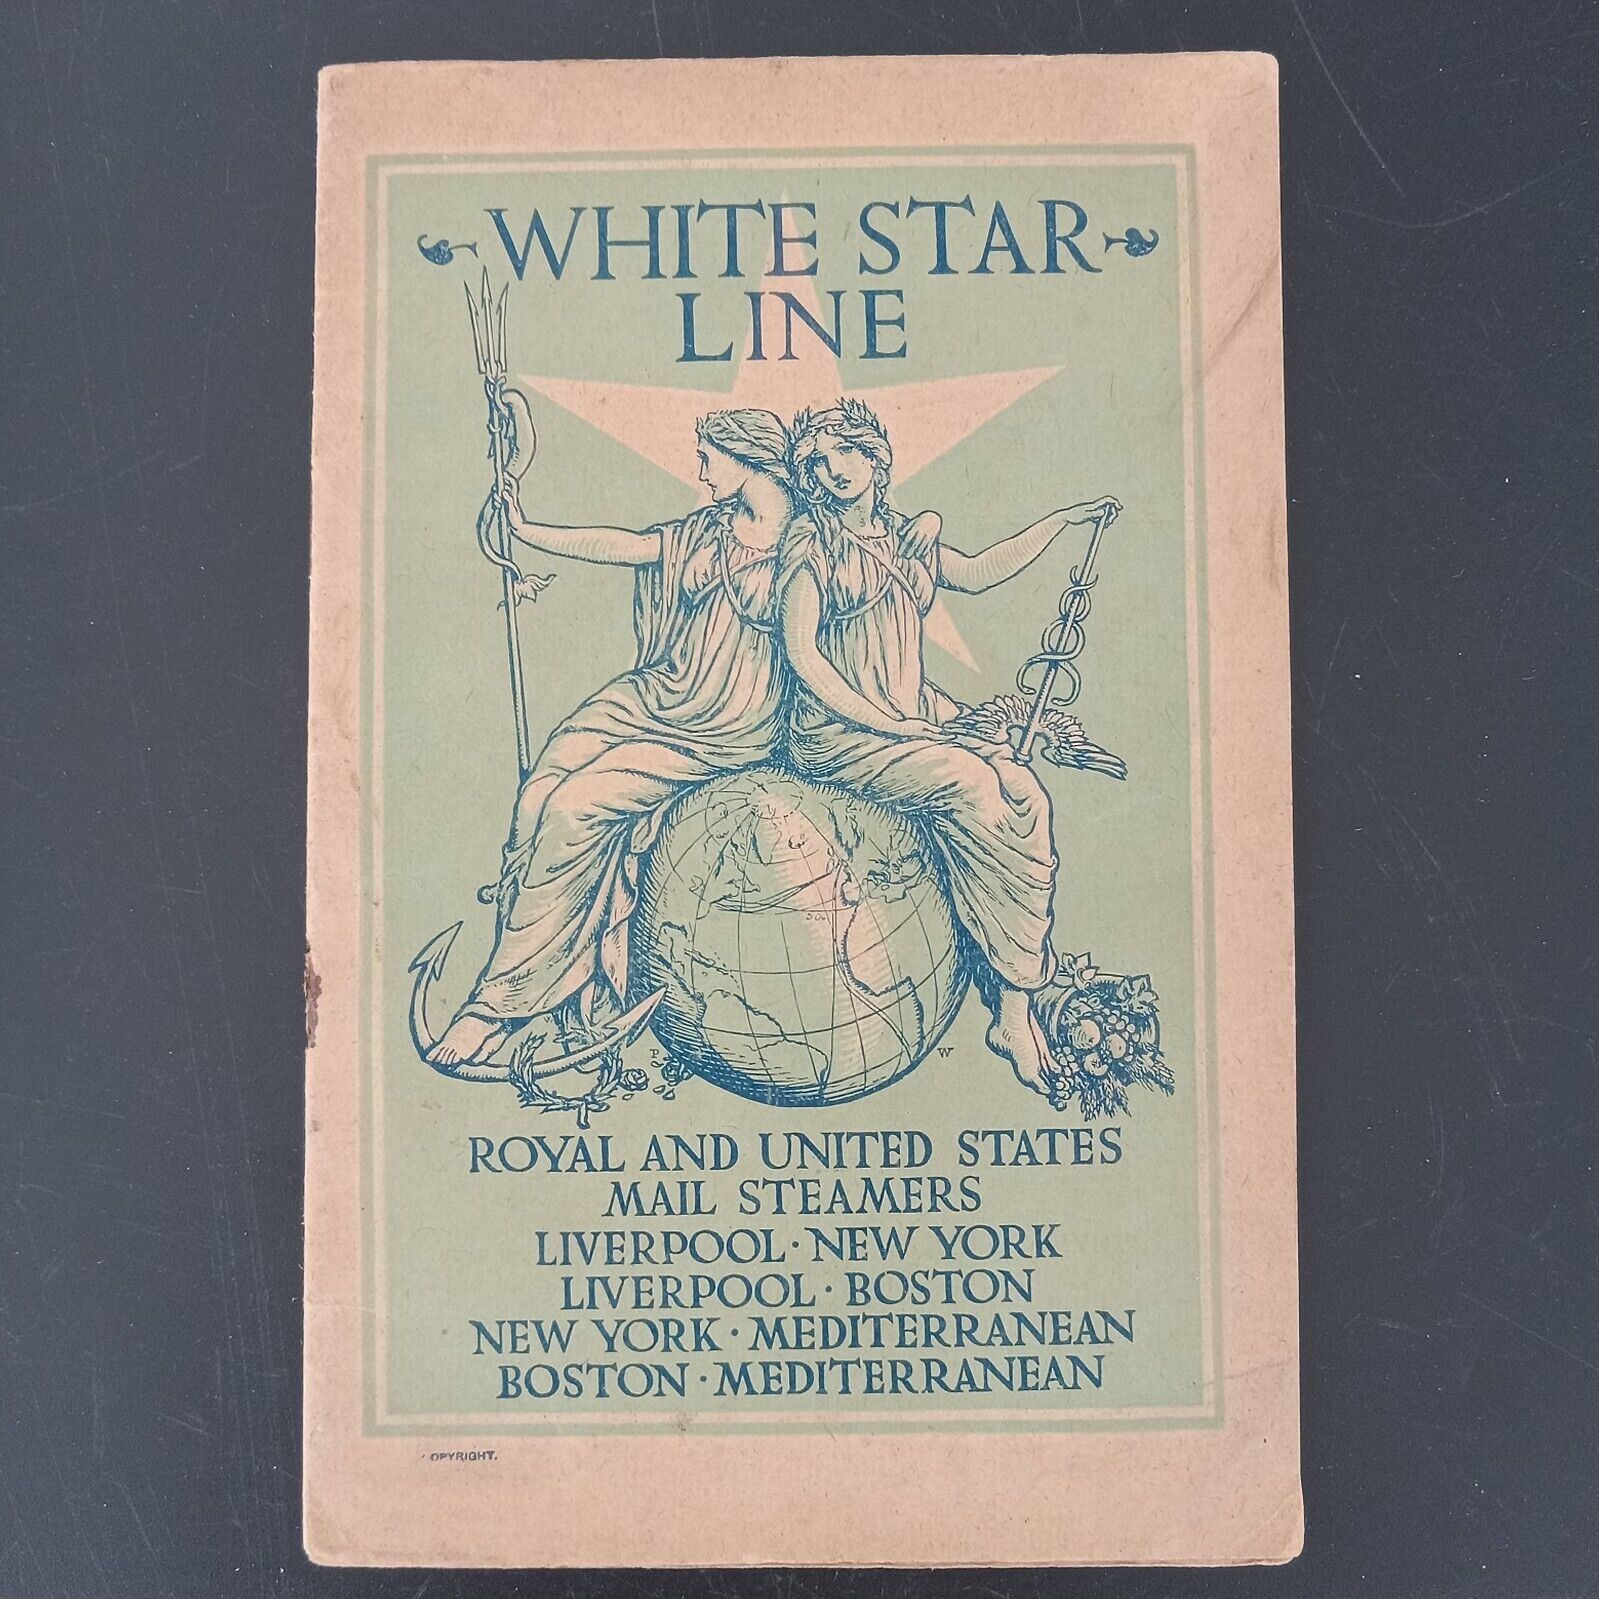 SS CELTIC White Star Line First Class Passenger List NY Liverpool May 31, 1907